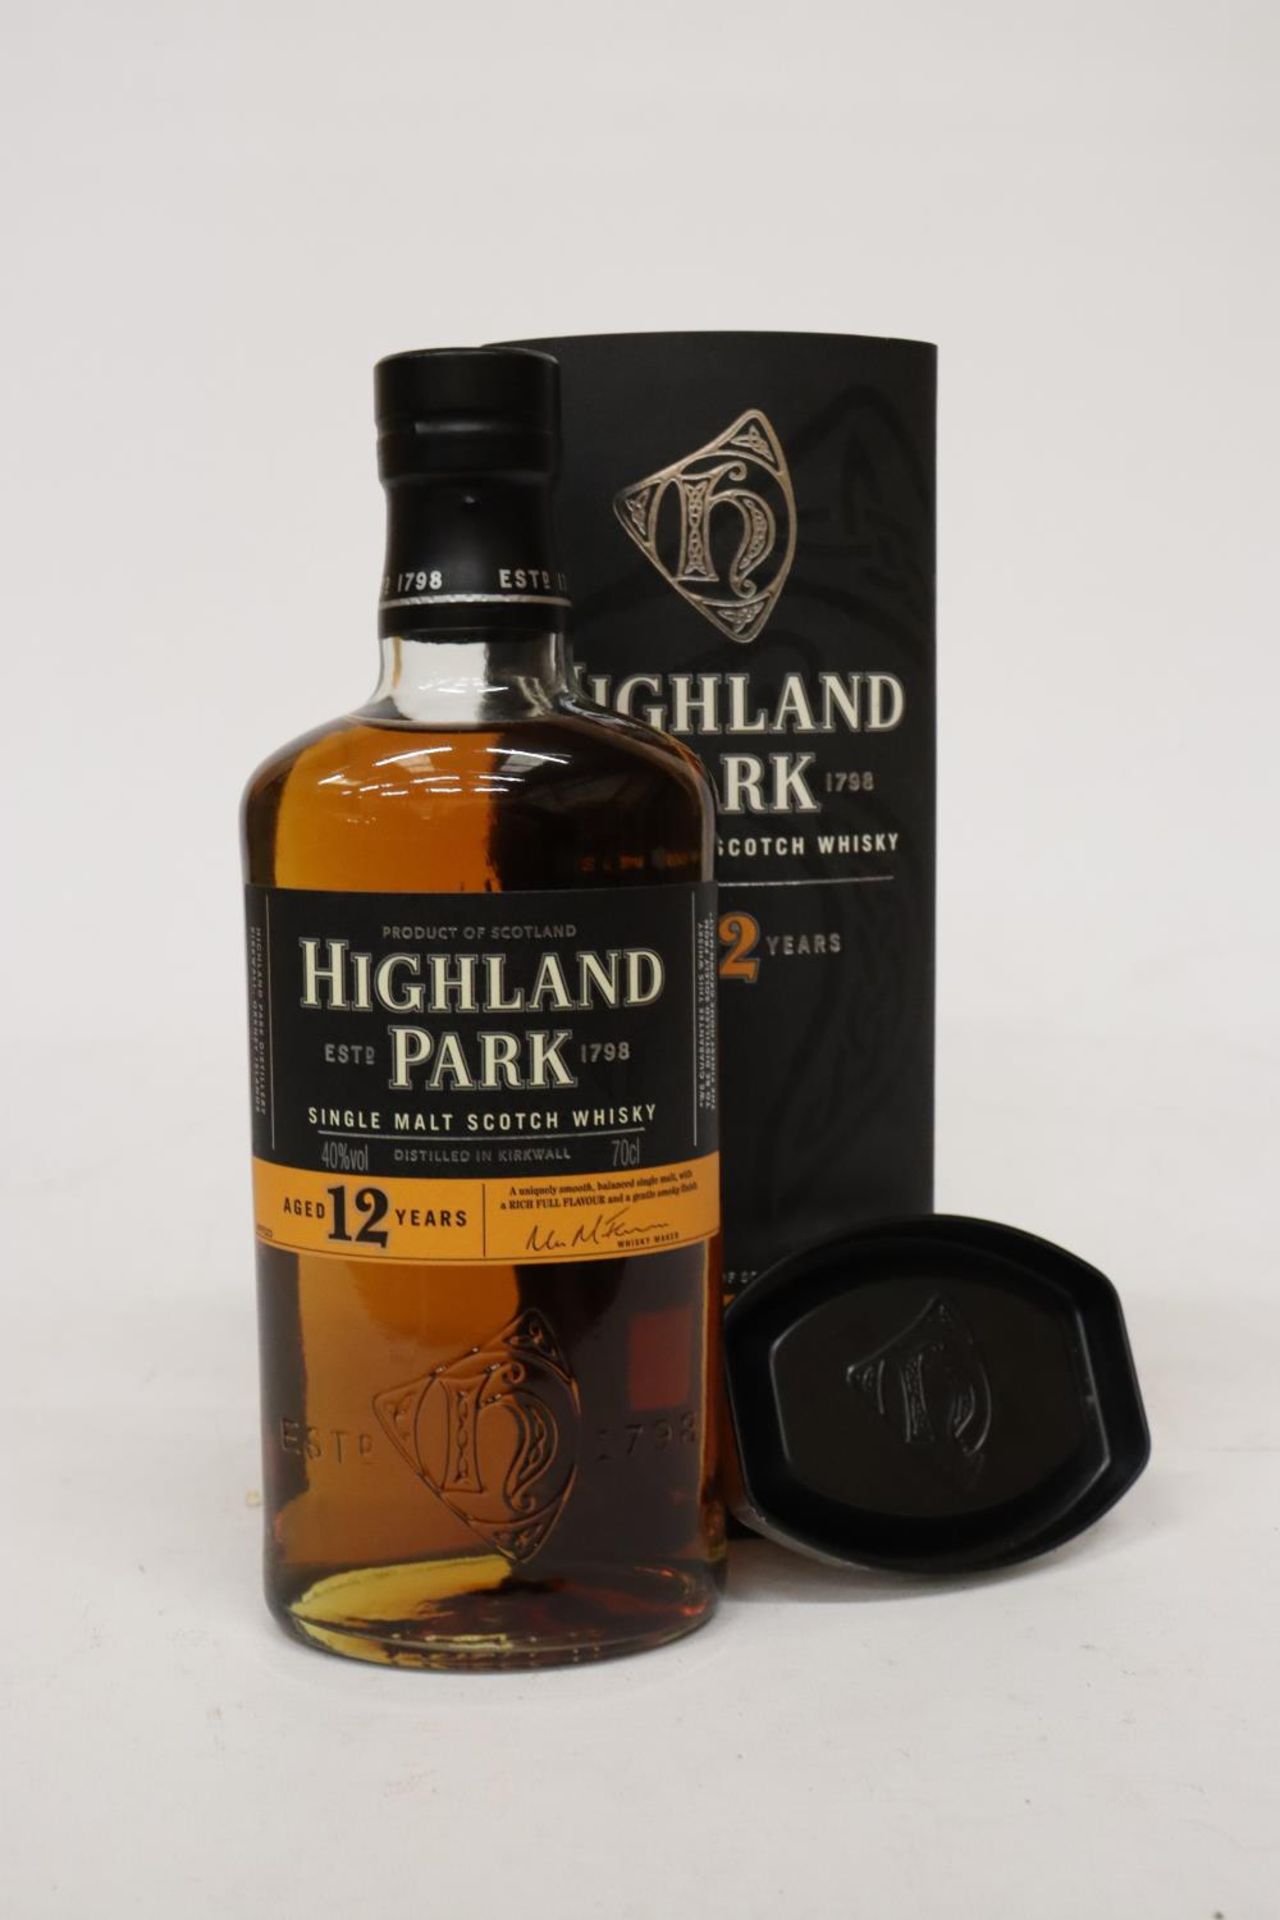 A BOTTLE OF HIGHLAND PARK 12 YEAR OLD WHISKY, BOXED